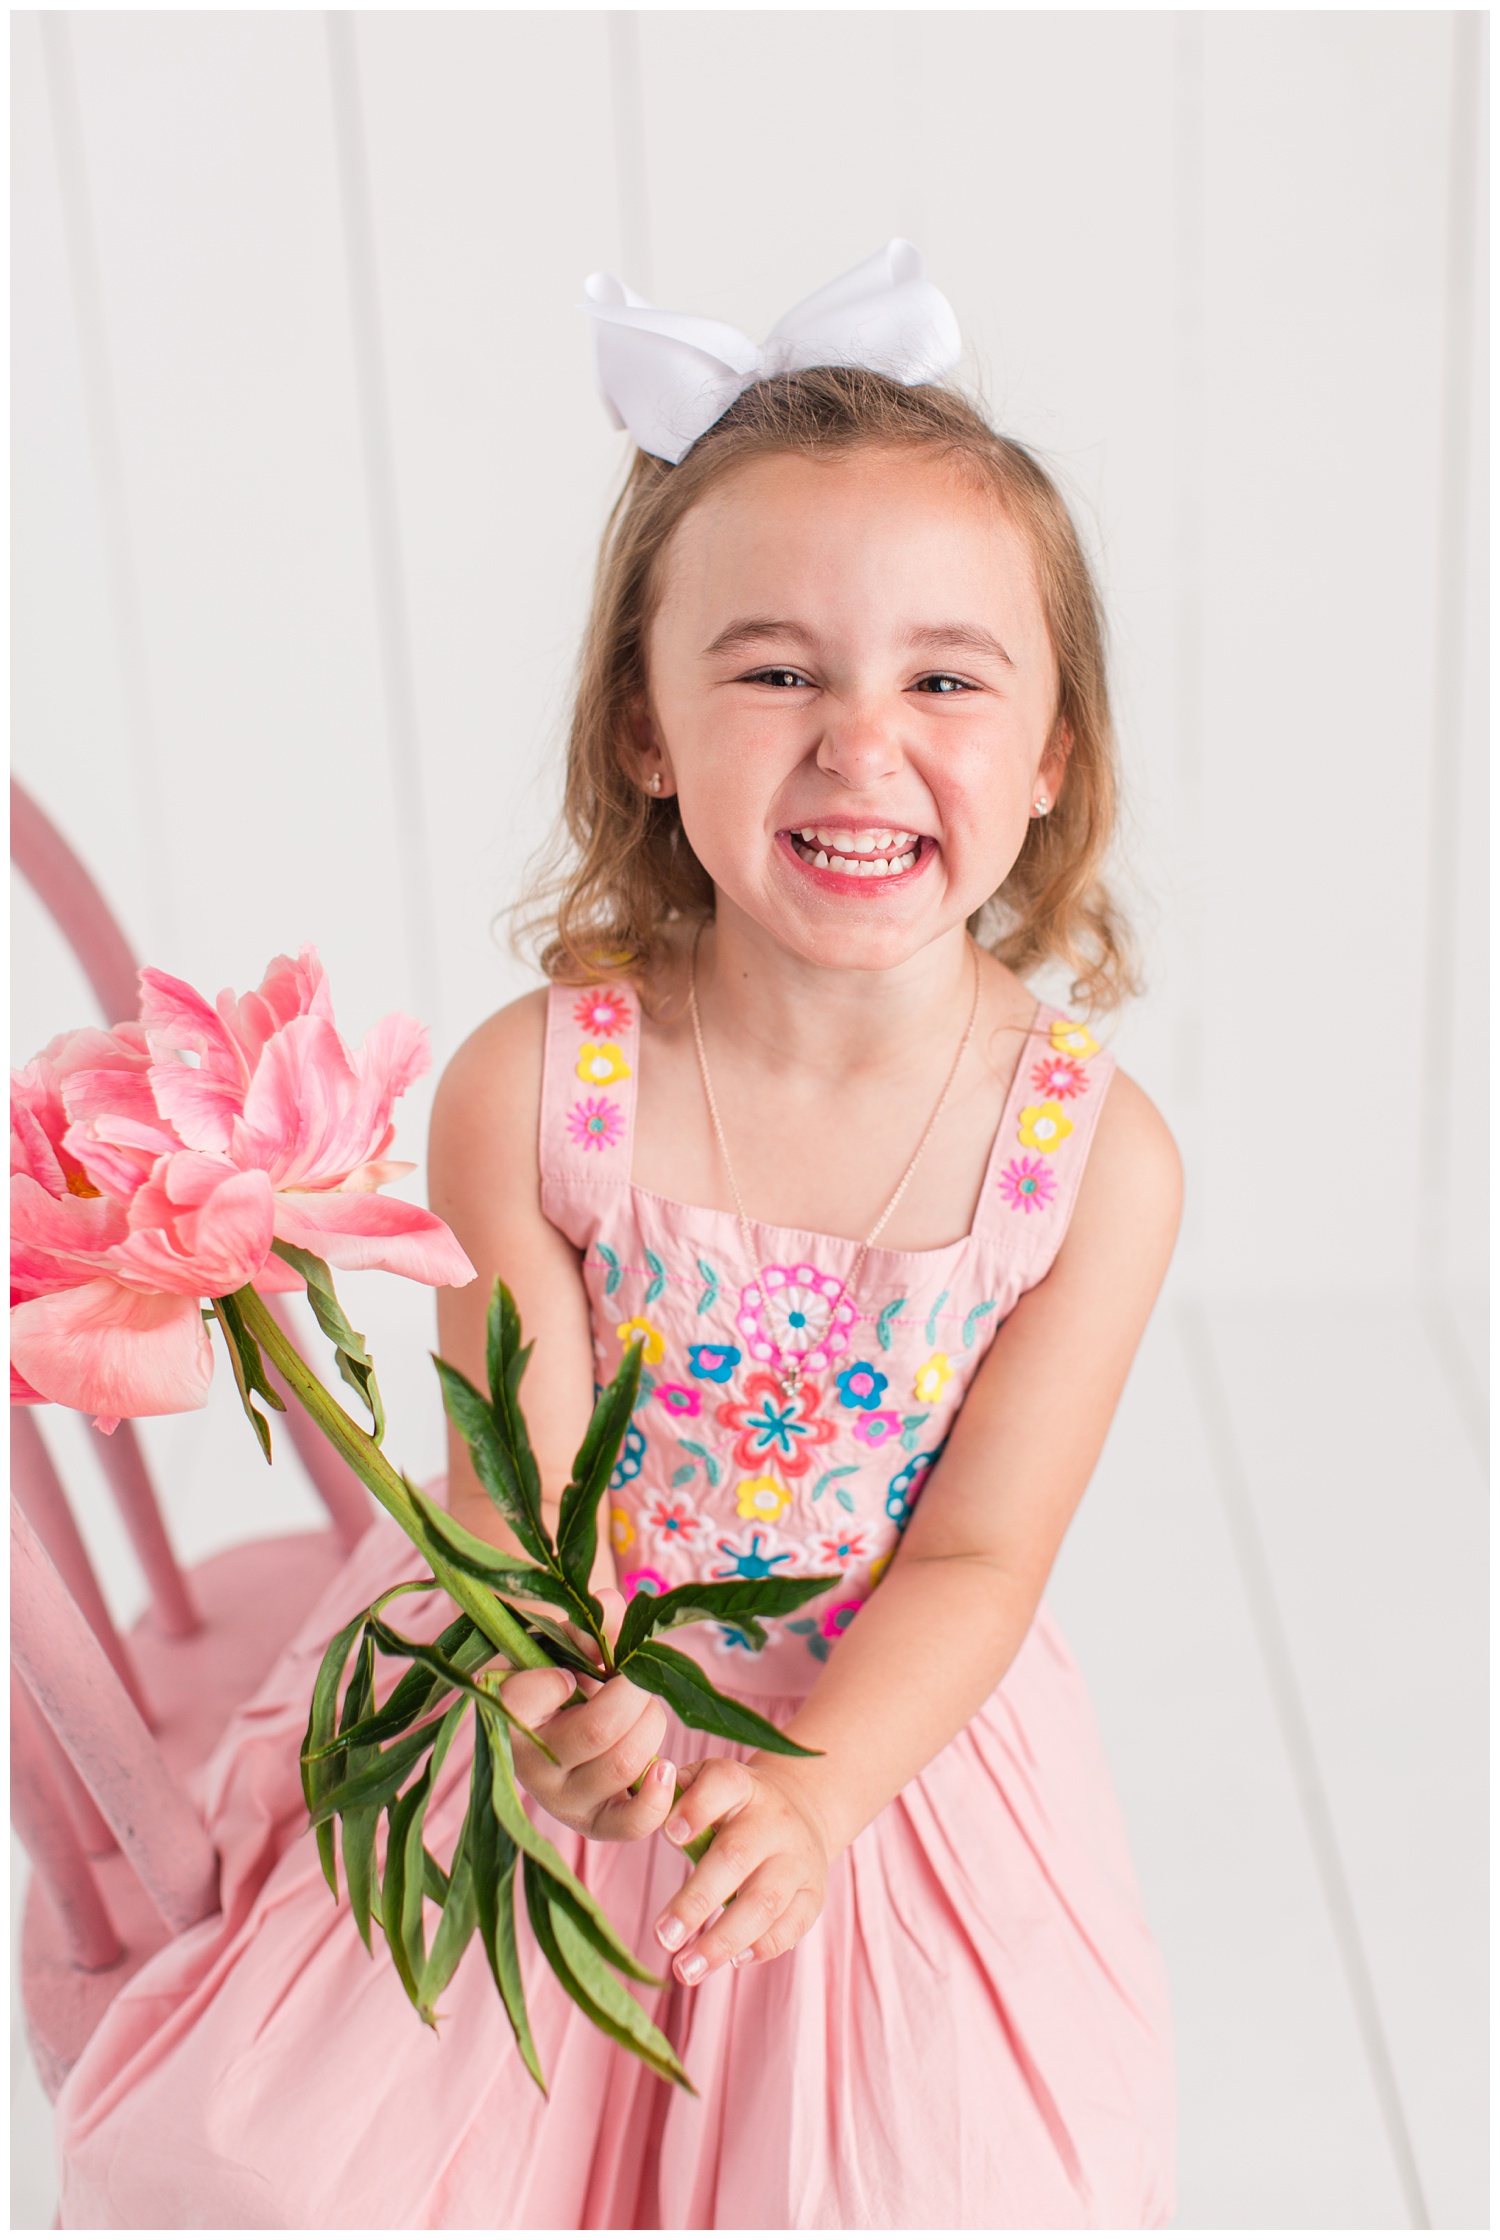 Four year old Sadie laughing while sitting on a pink chair wearing a pink dress with floral embroidered bodice and holding a pink peony stem.